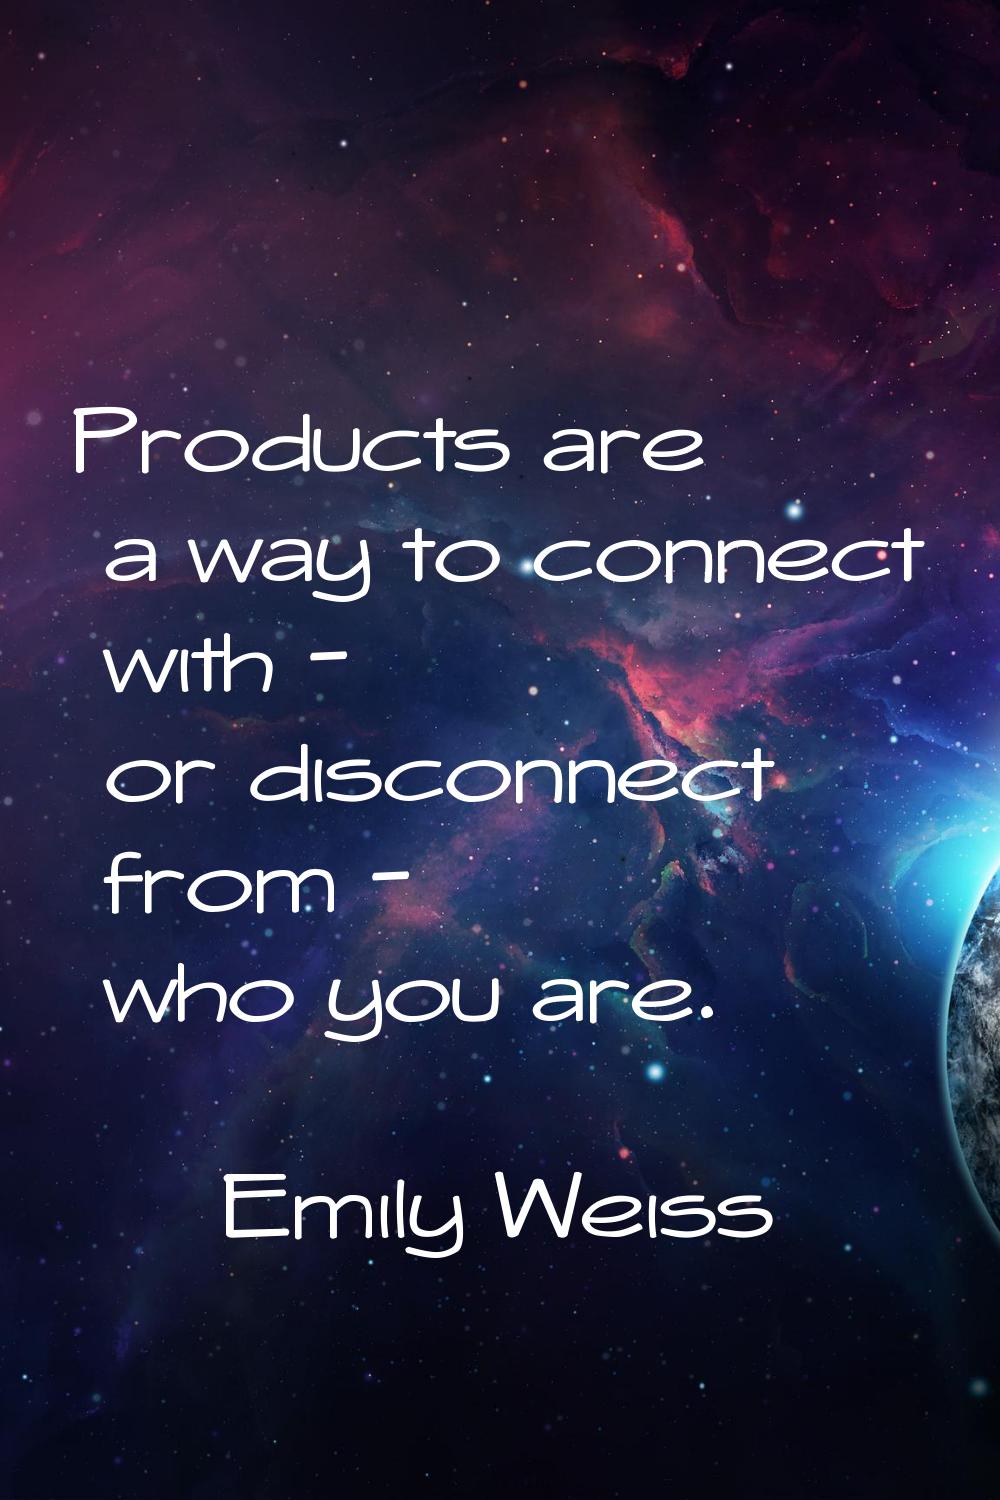 Products are a way to connect with - or disconnect from - who you are.